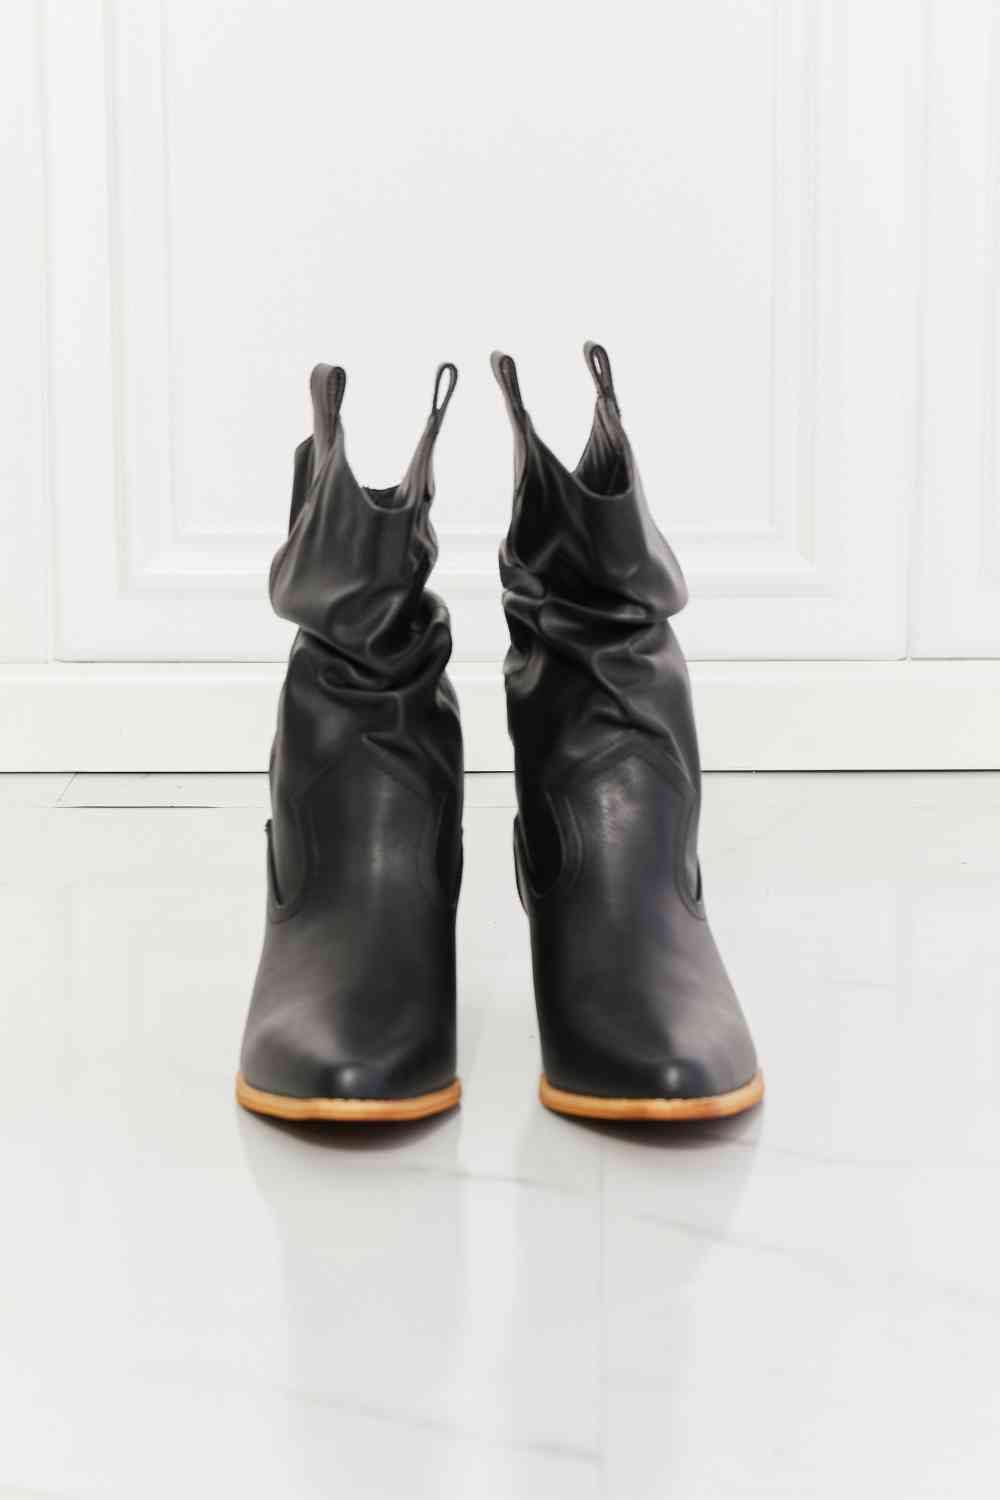 MMShoes Better in Texas Scrunch Cowboy Boots in Black - Happily Ever Atchison Shop Co.